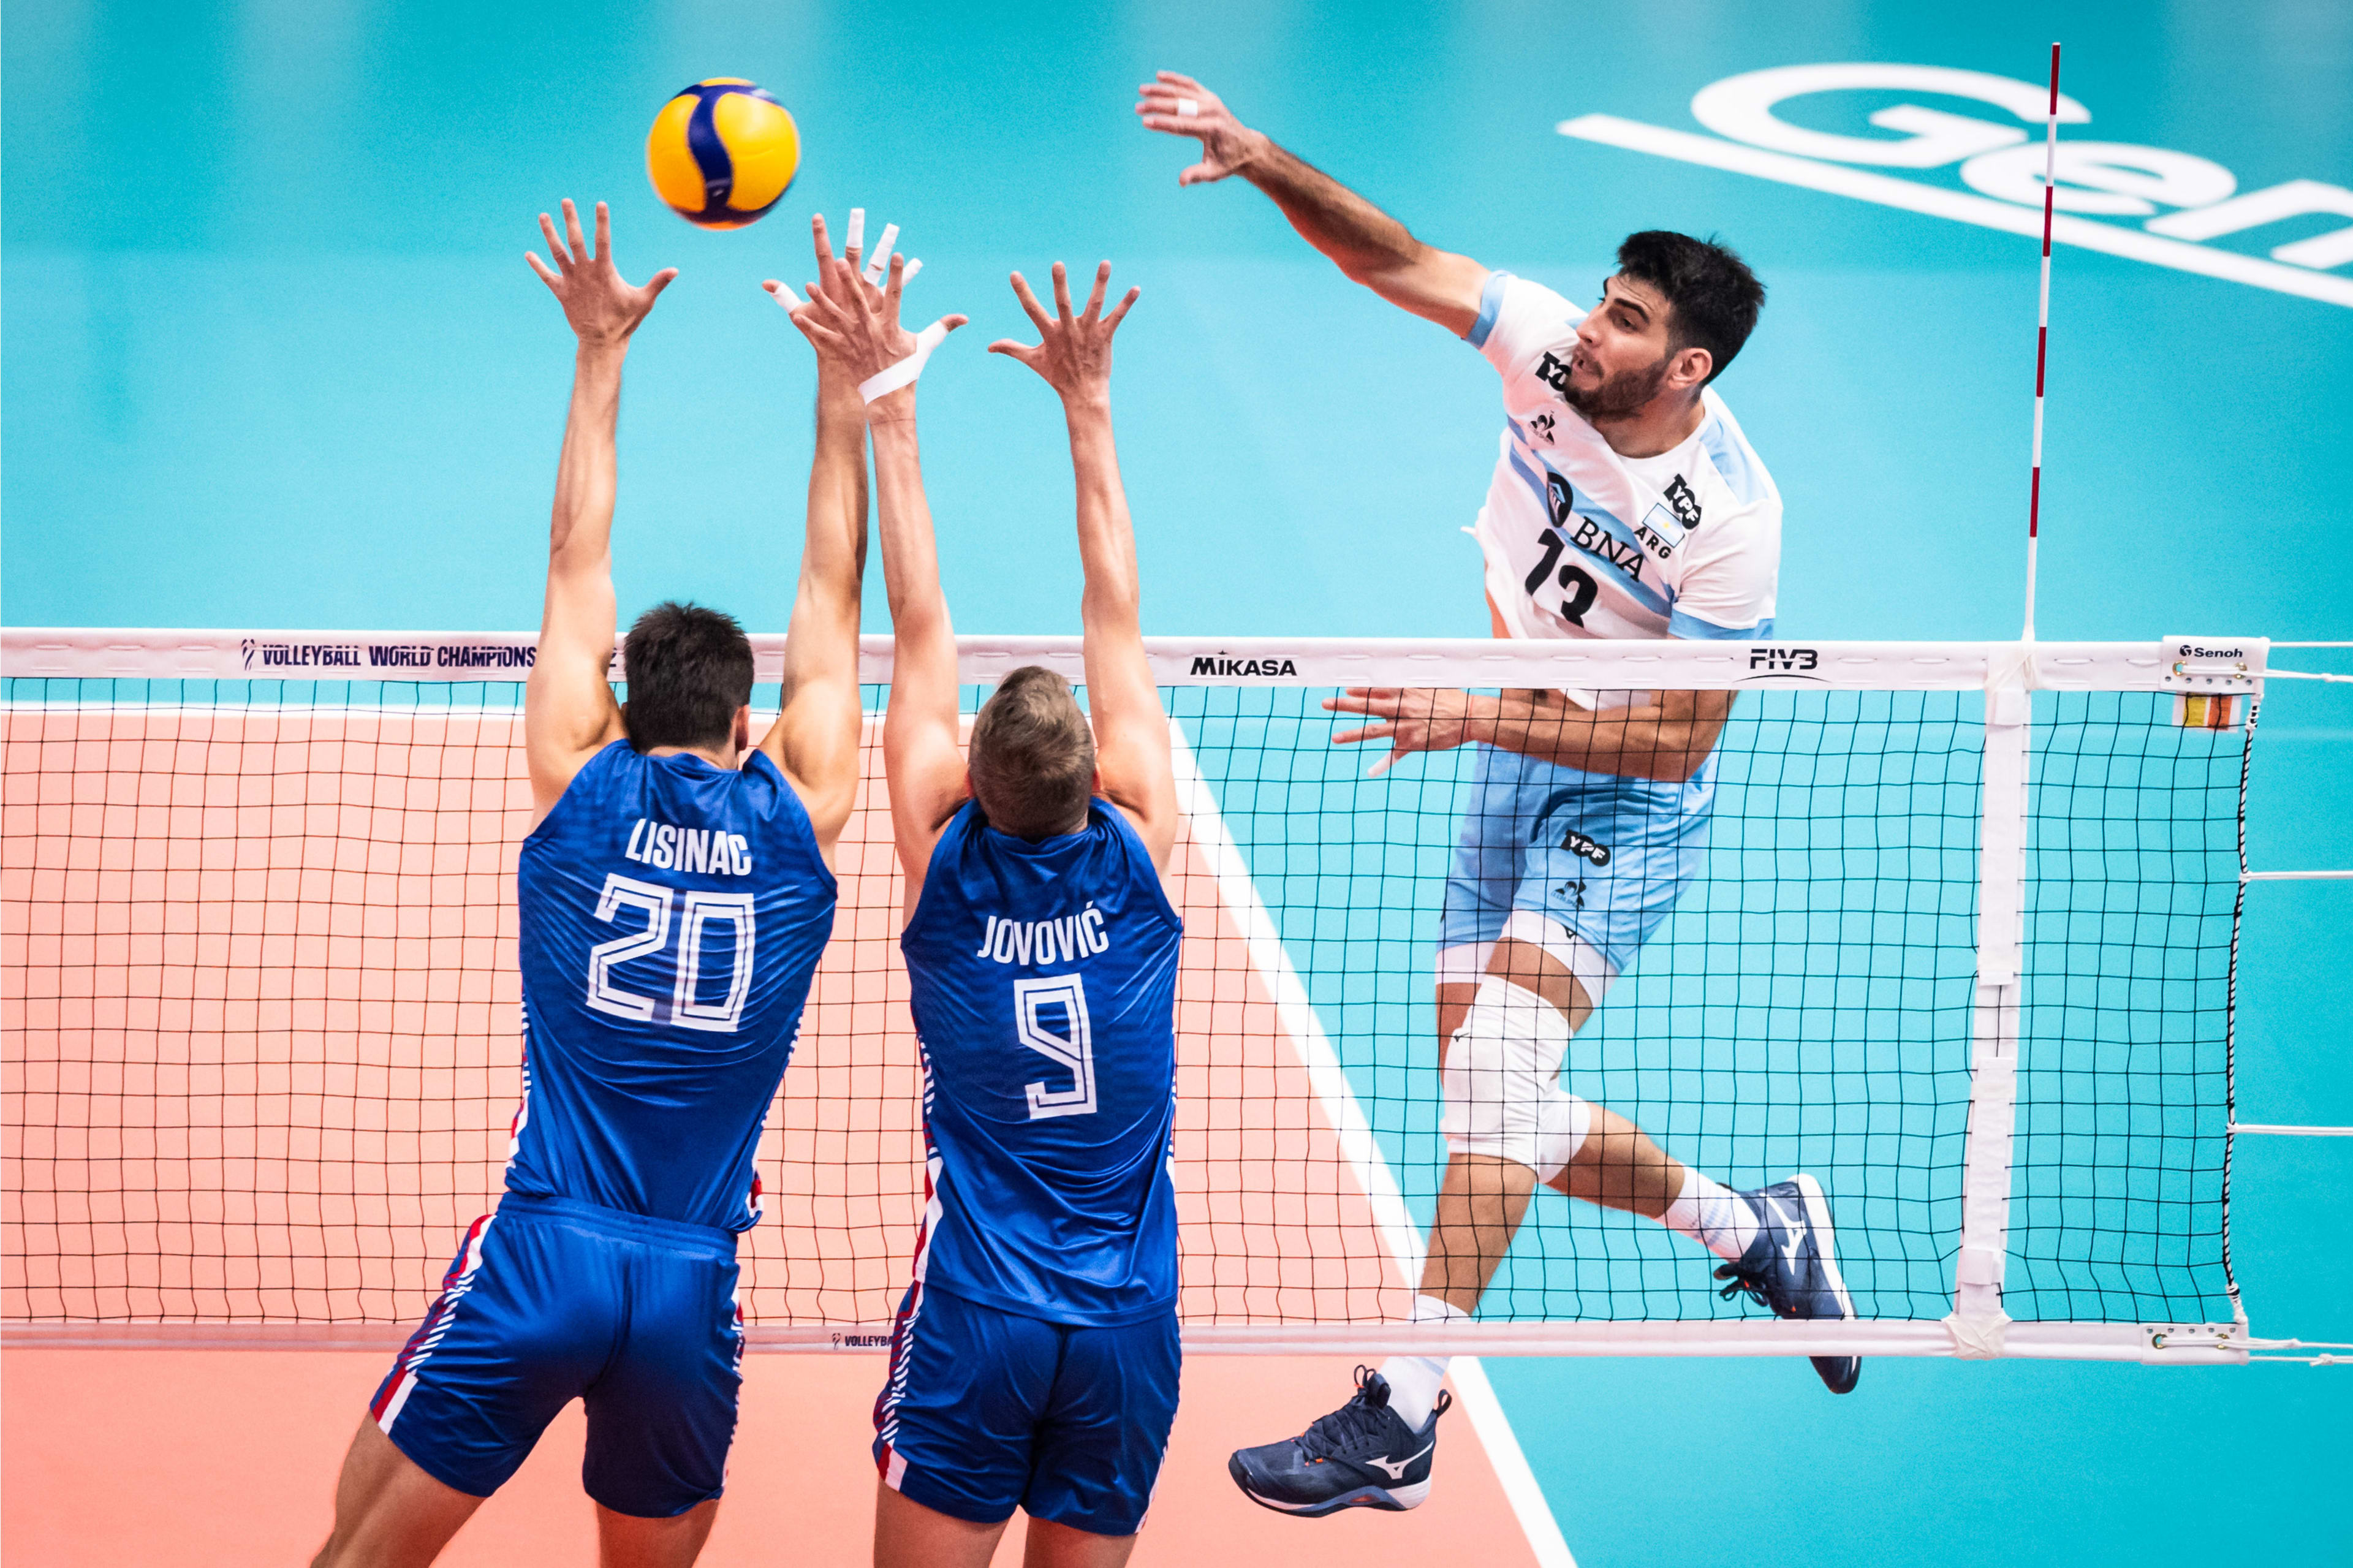 Argentina Put Up A Relentless Show Against The Serbs And Qualified For The Quarter-Finals